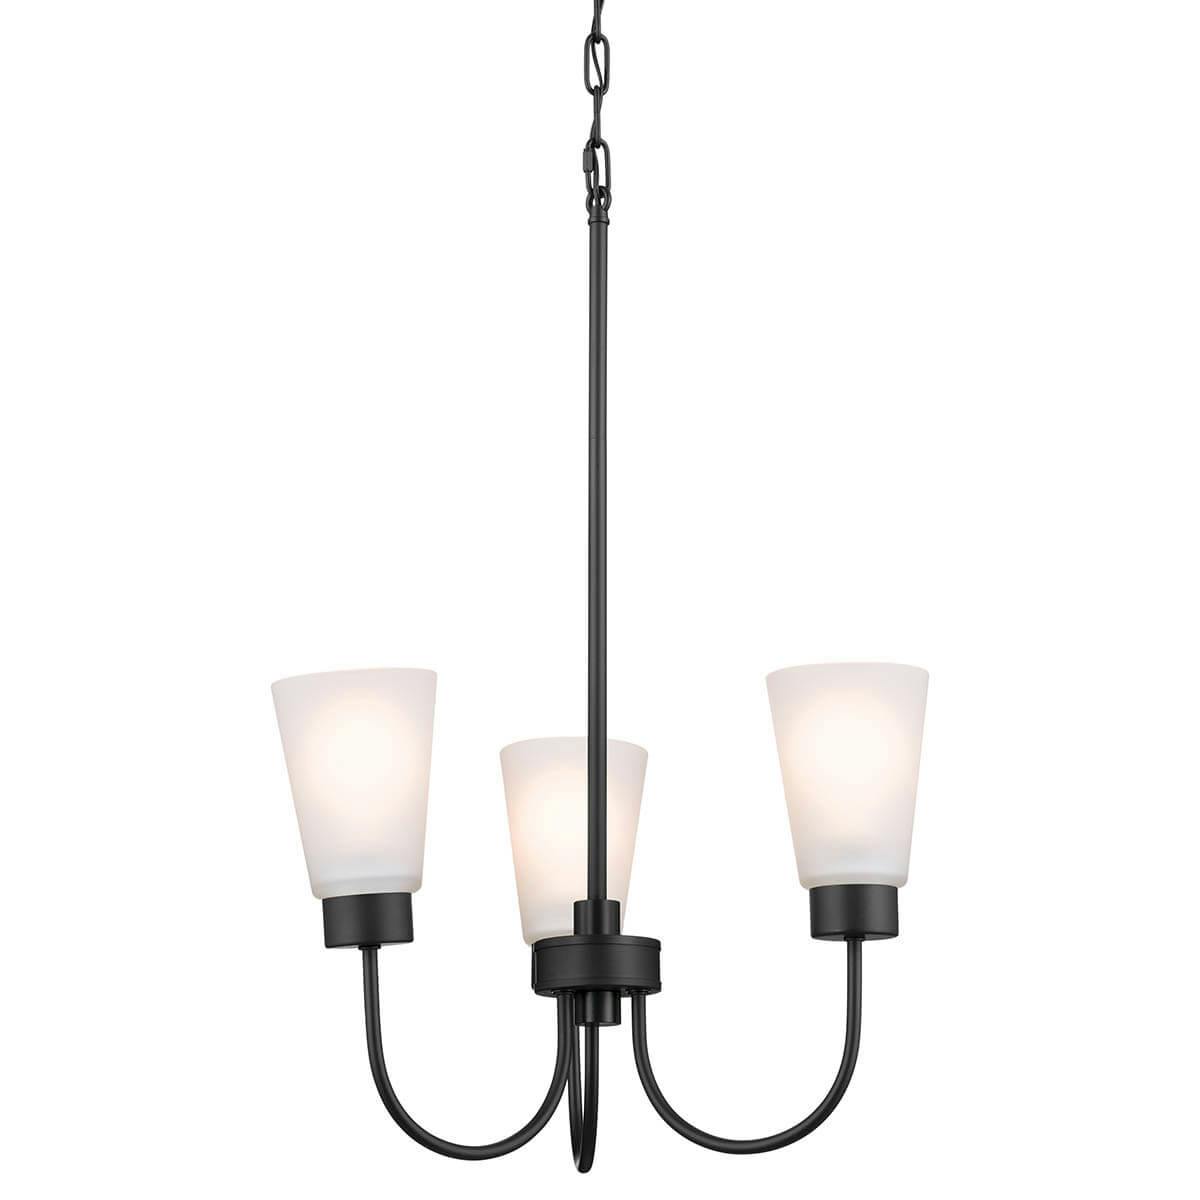 Erma 18" 3 Light Chandelier Black without the canopy on a white background